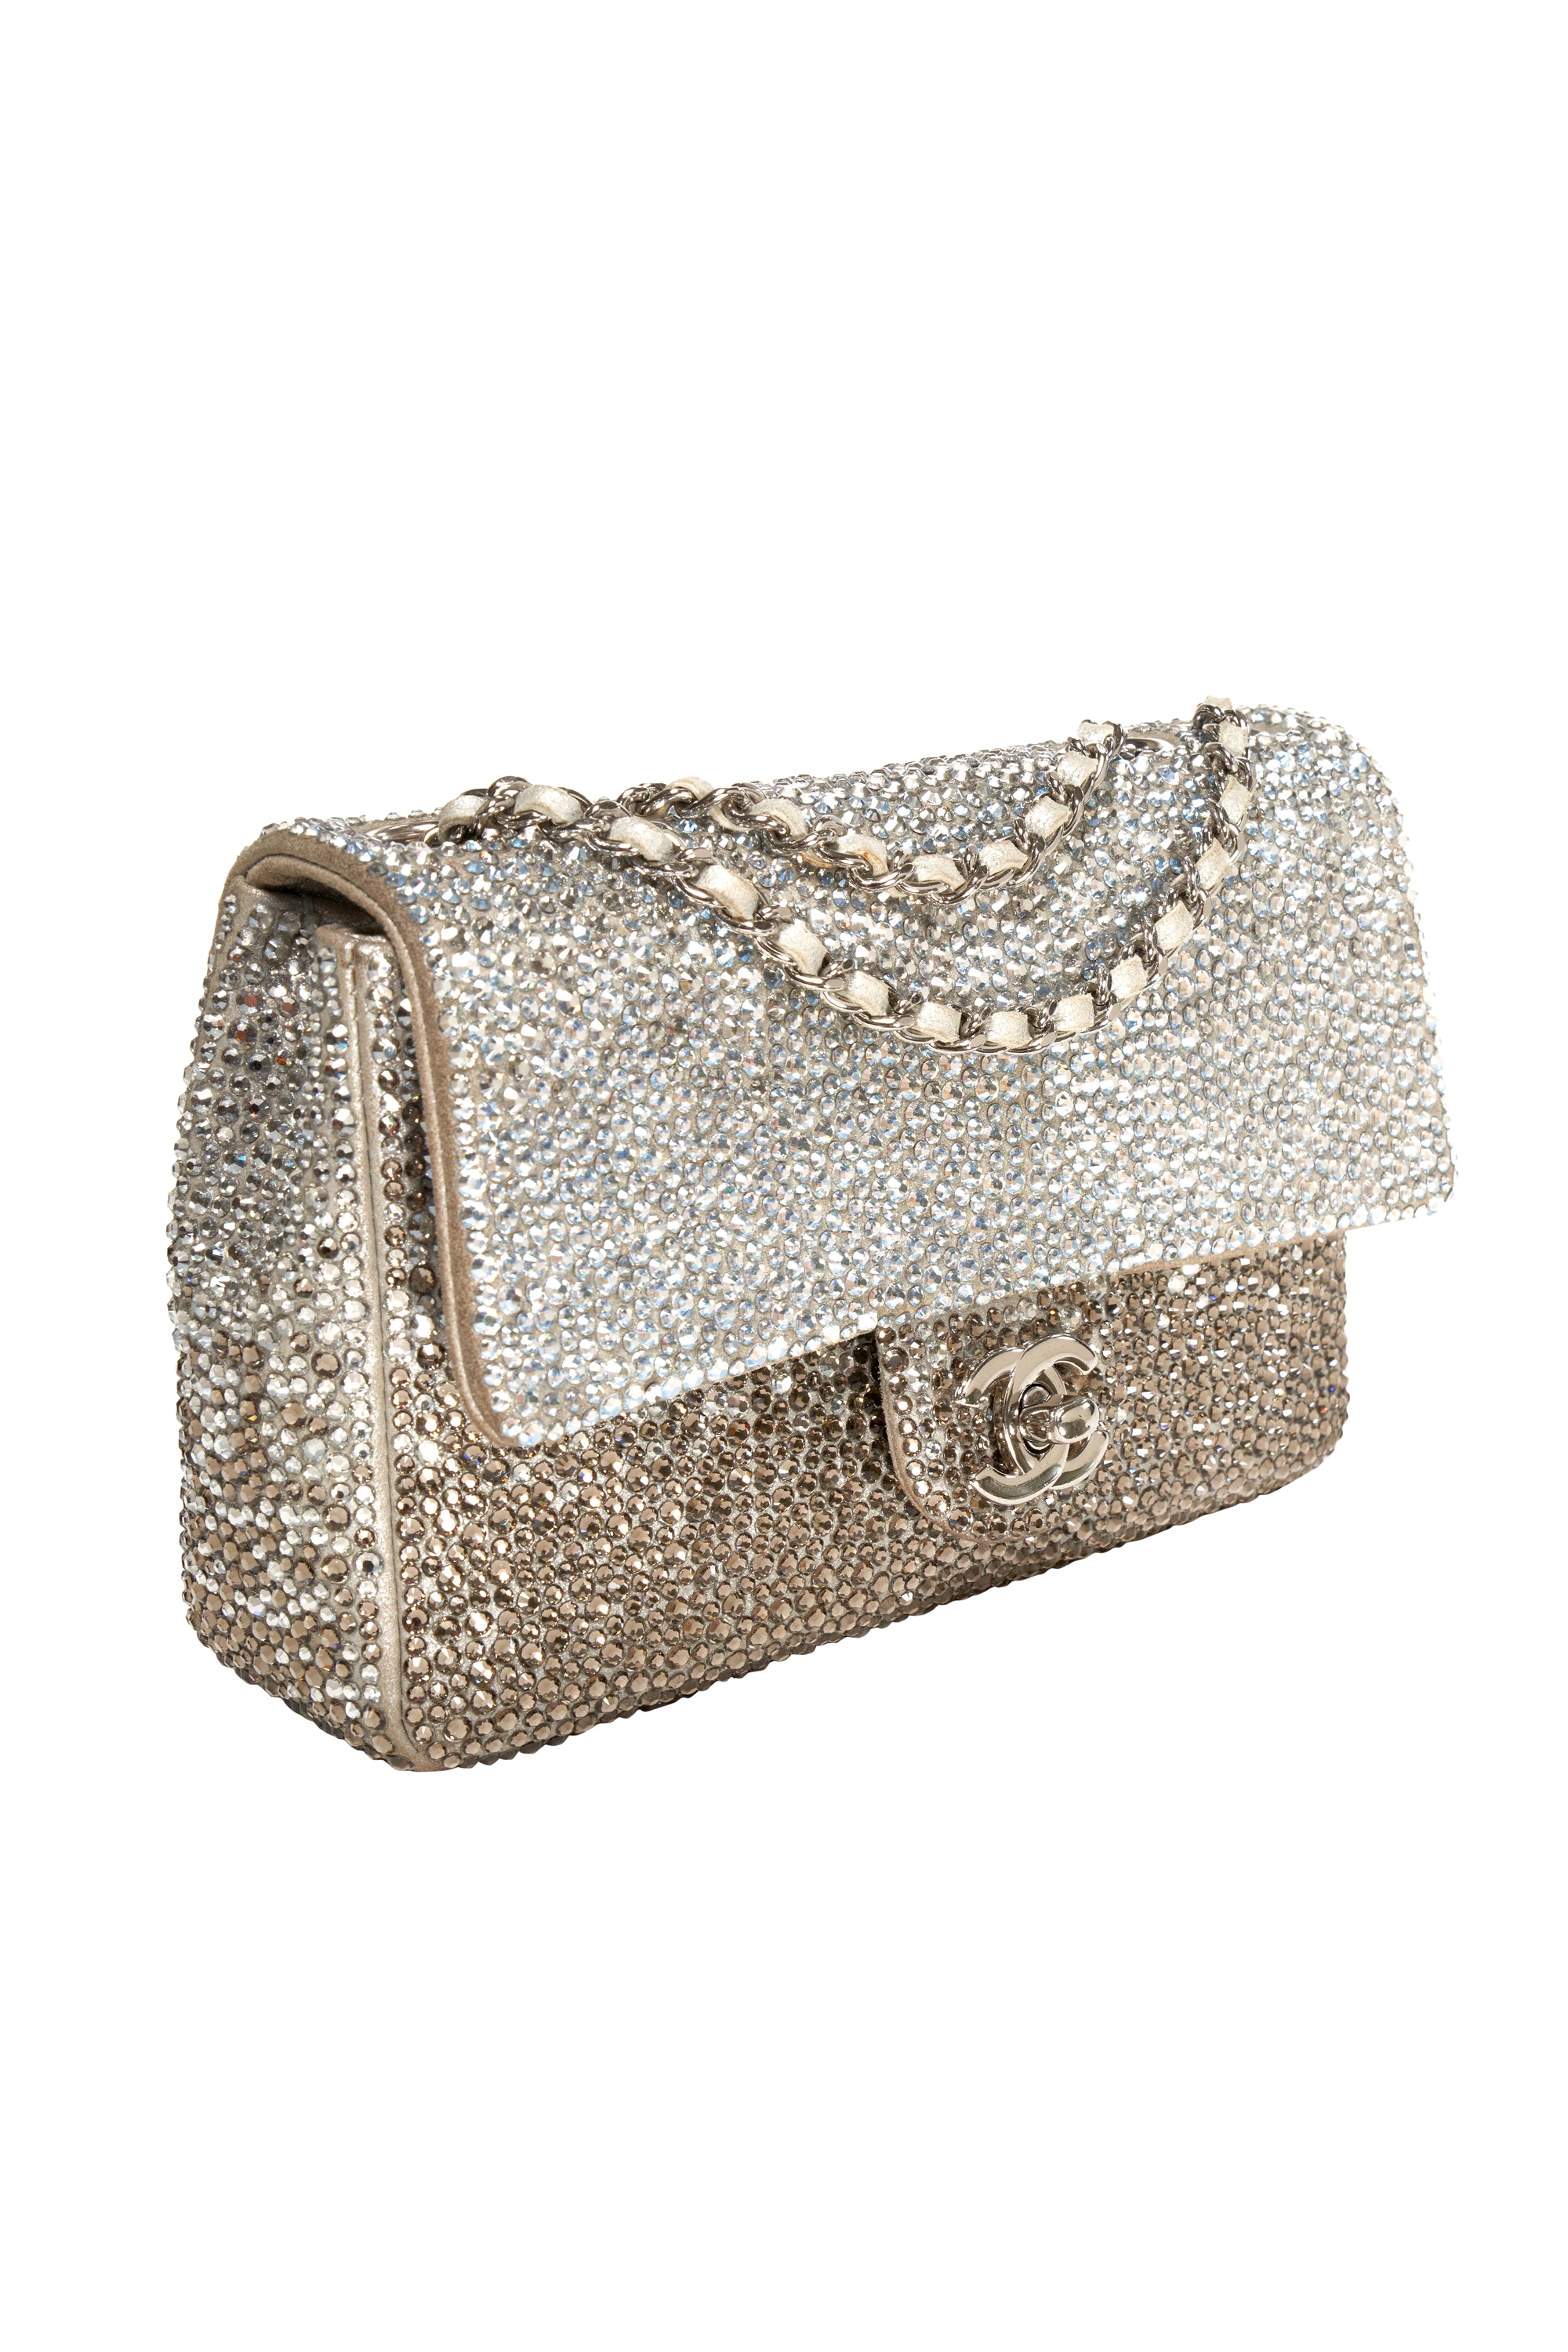 Chanel Silver Ombre Crystal Flap Bag